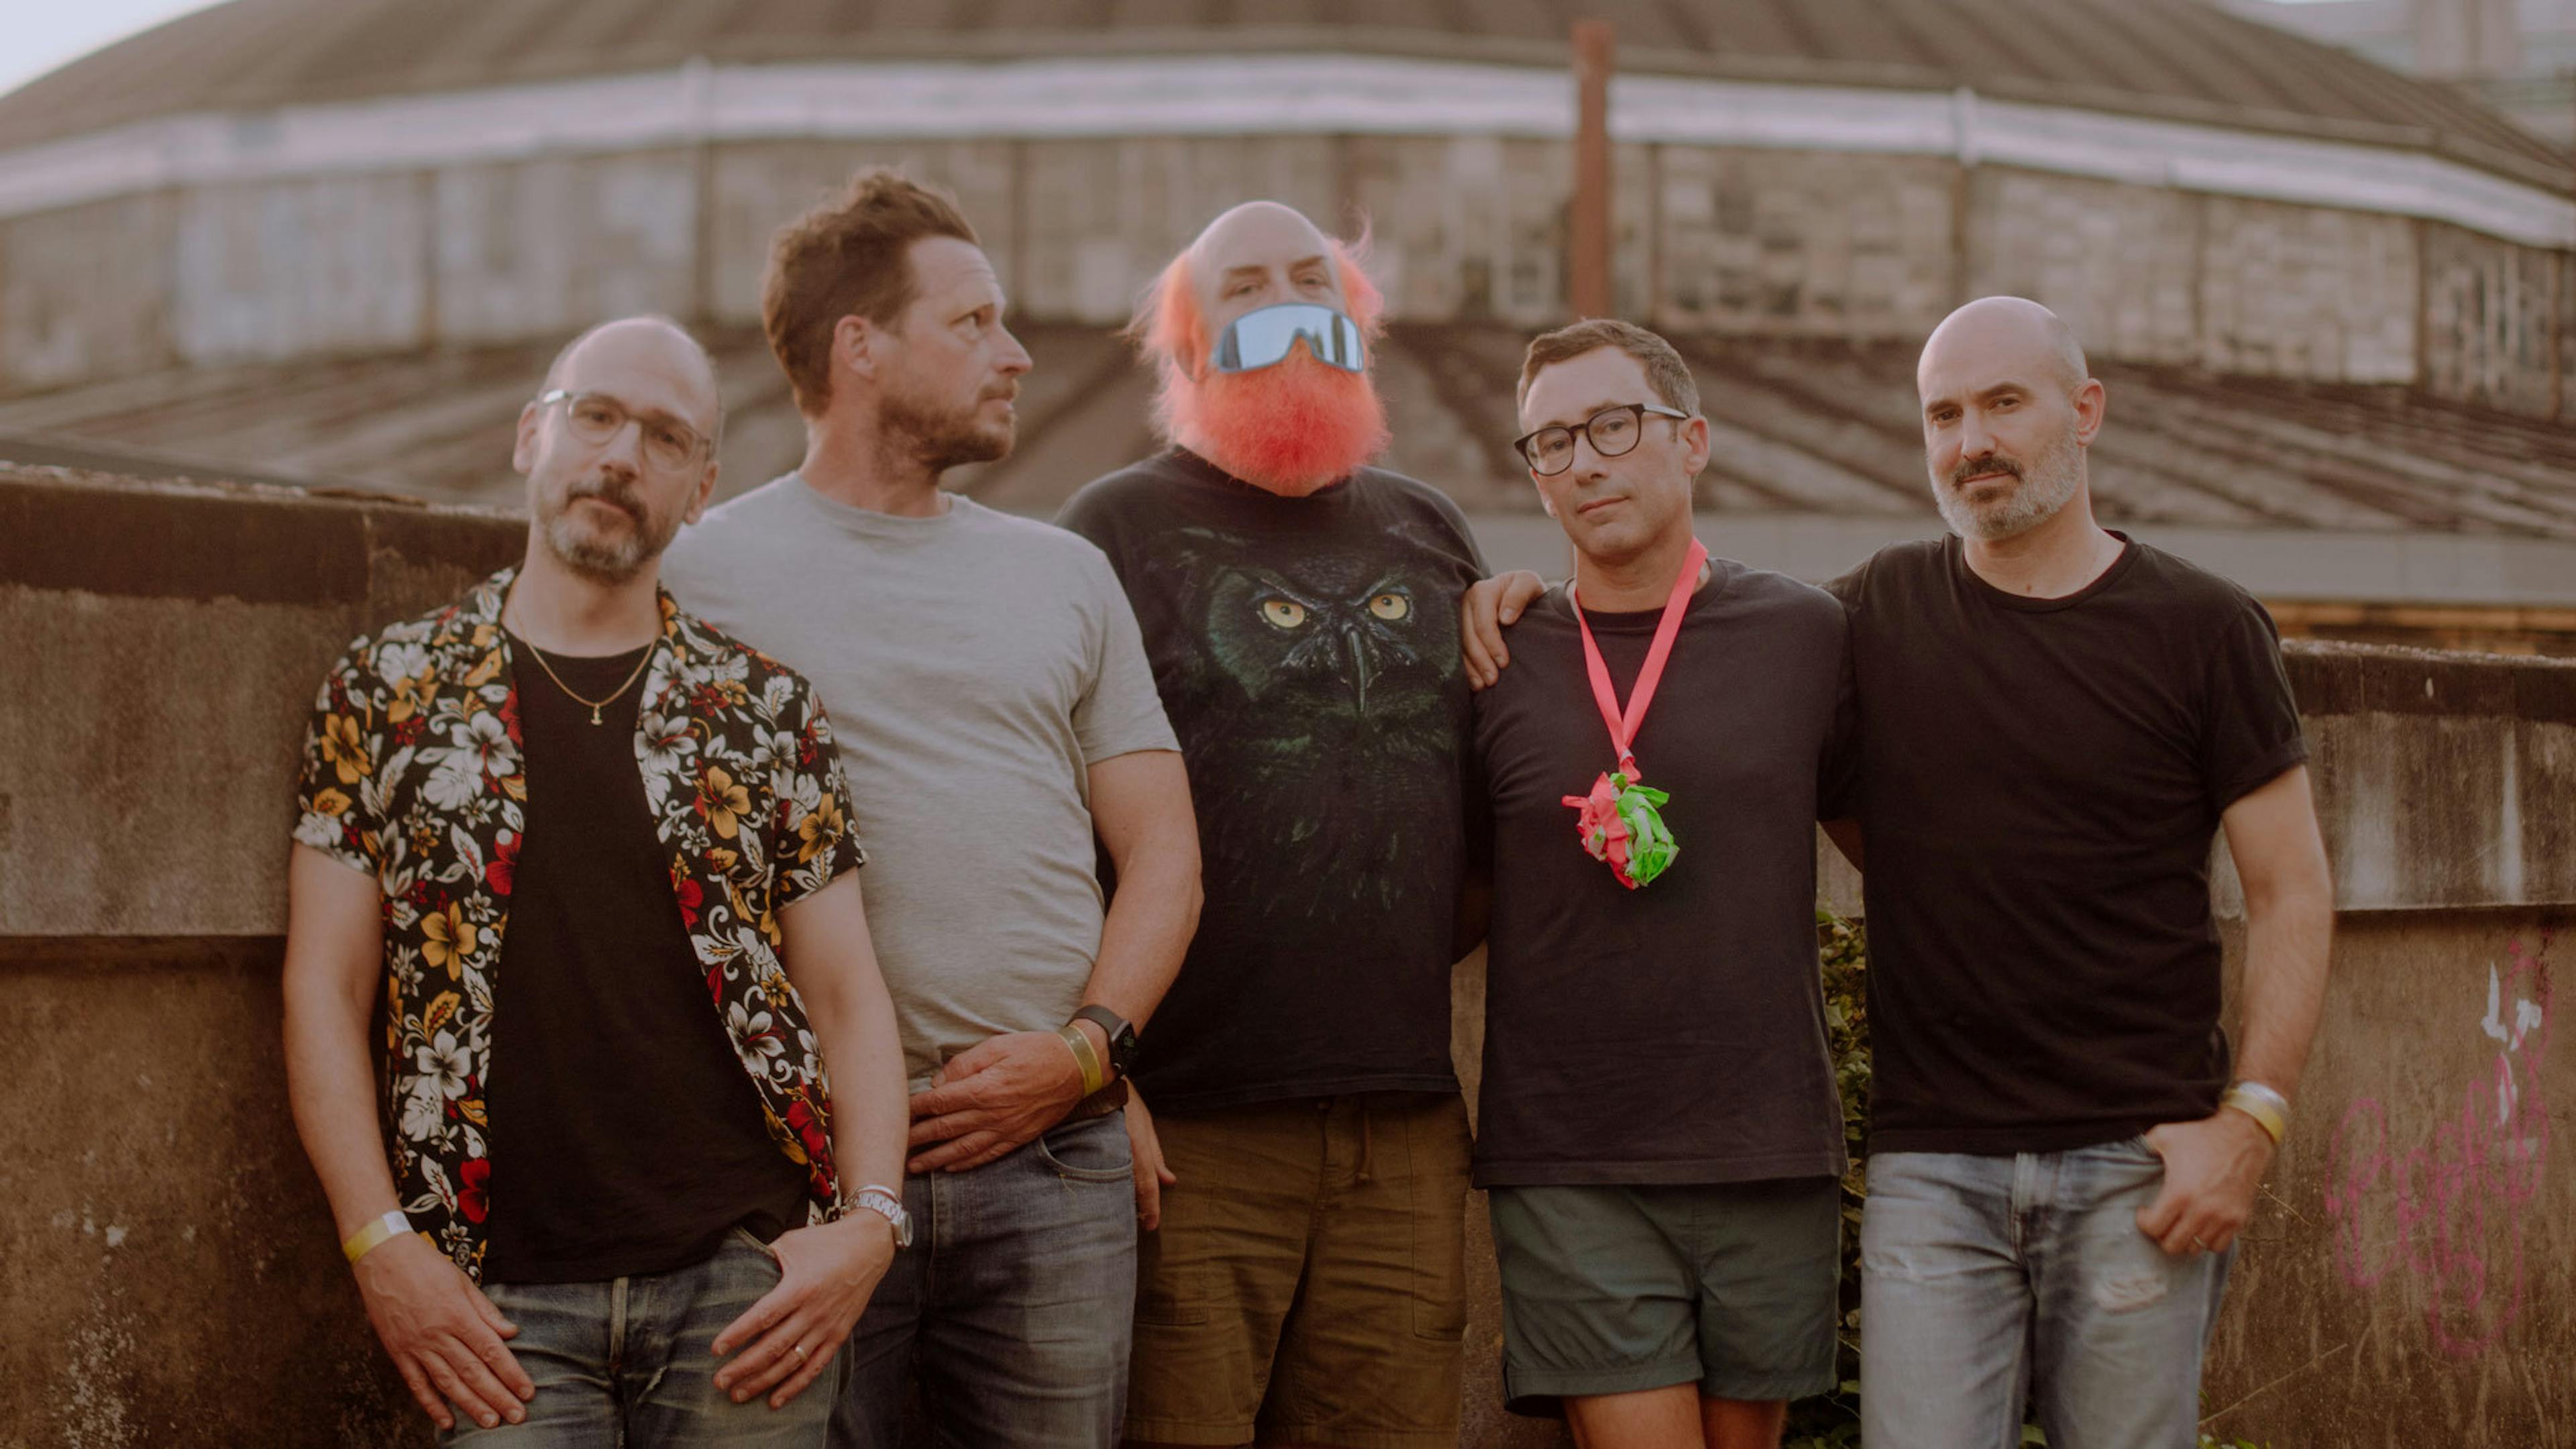 Les Savy Fav return with first new single in 14 years, Legendary Tippers